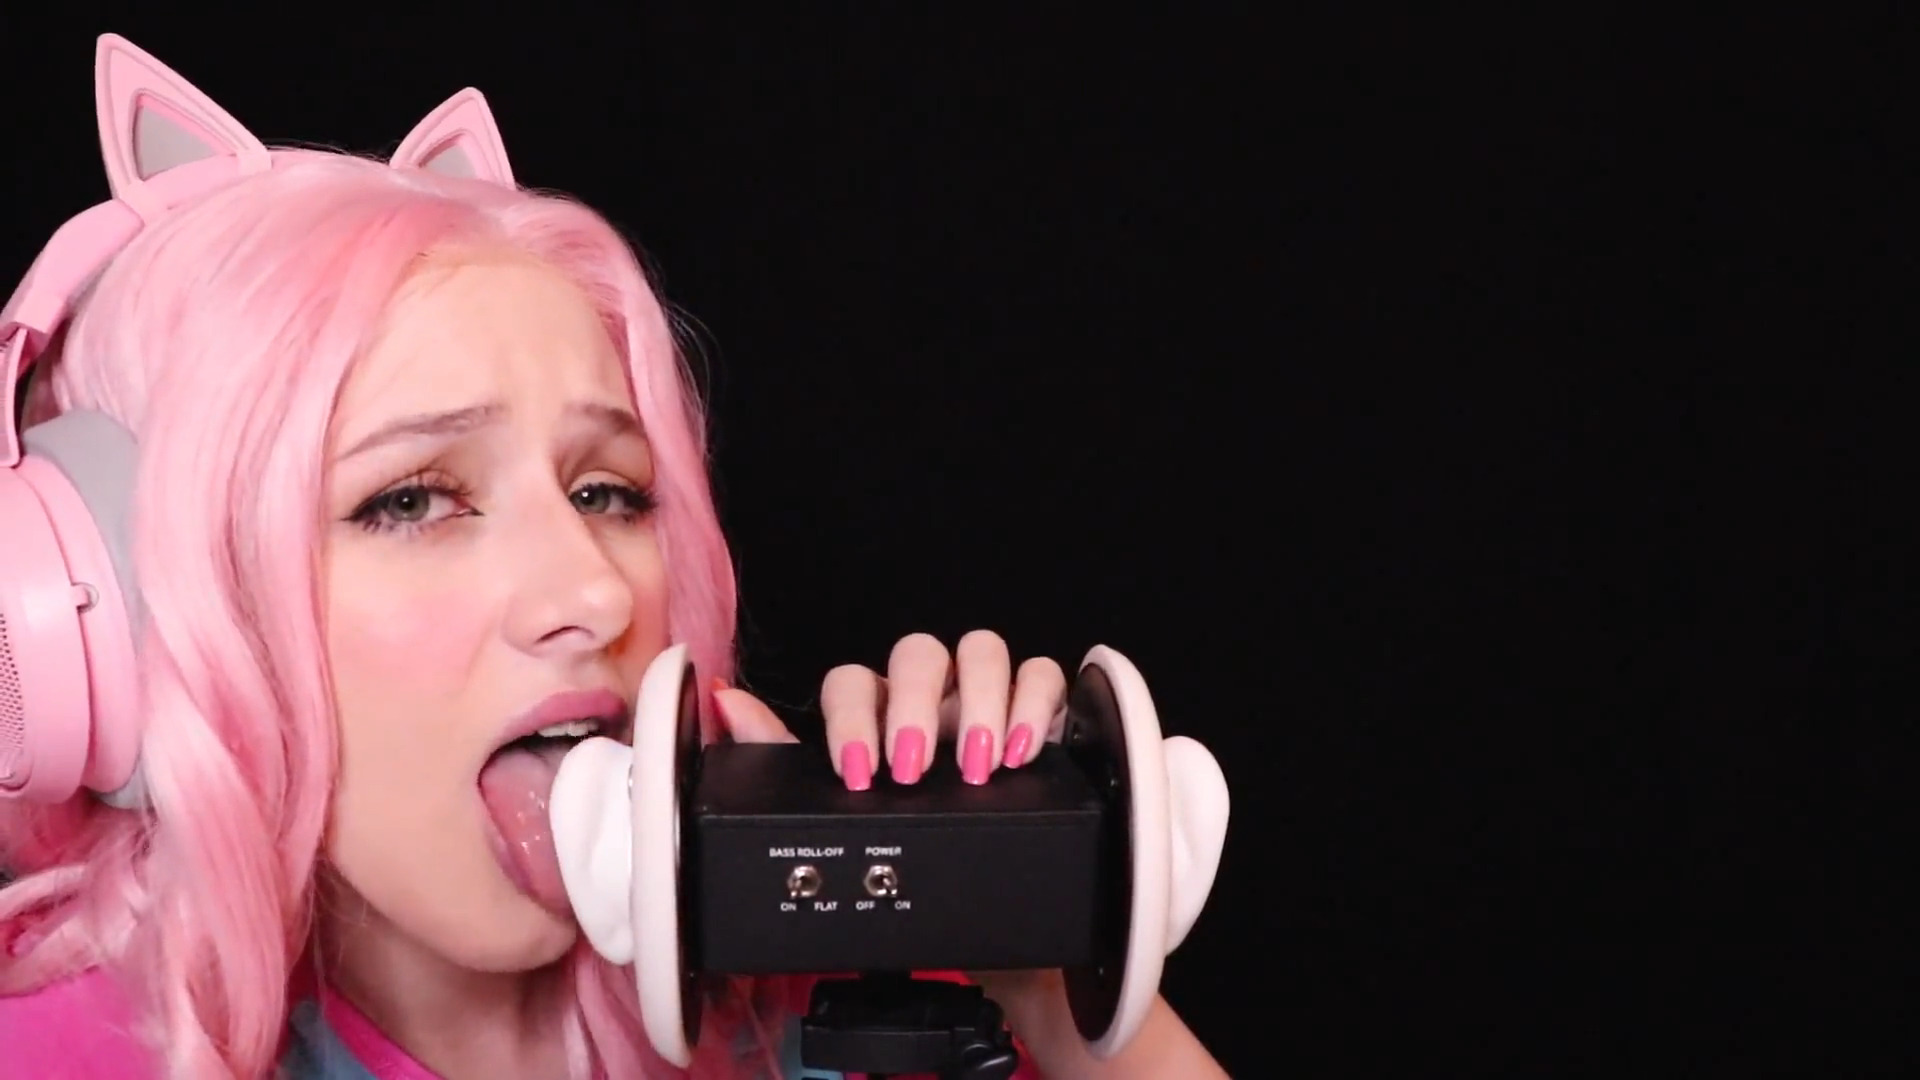 Diddly Asmr Ahegao Ear Licking Exclusive Video Leaked